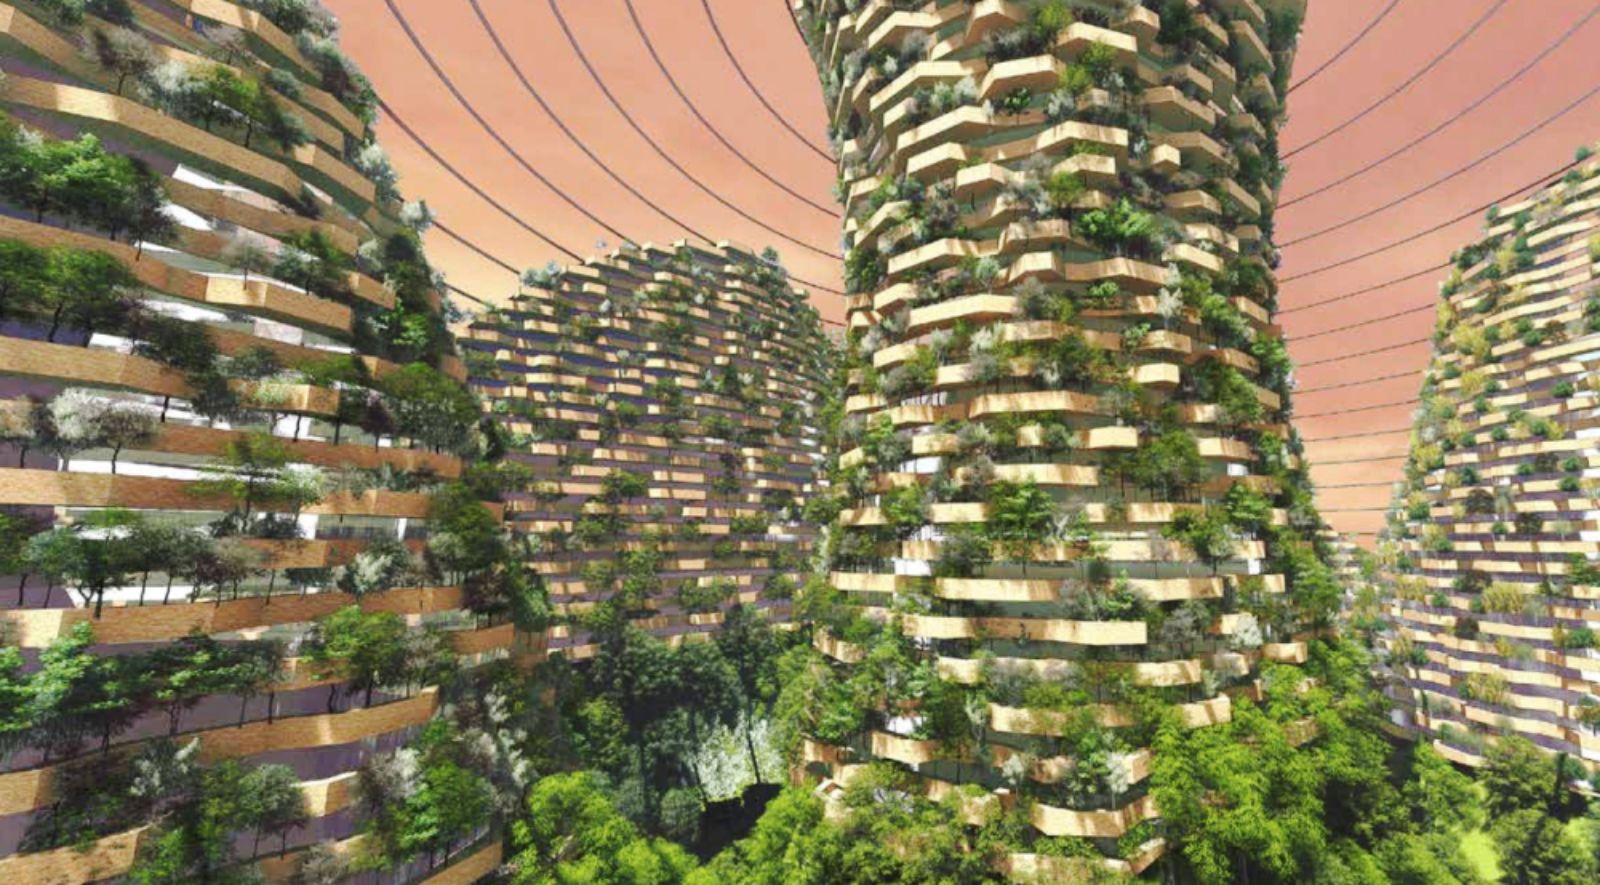 Vertical Forest • Seeds on Mars